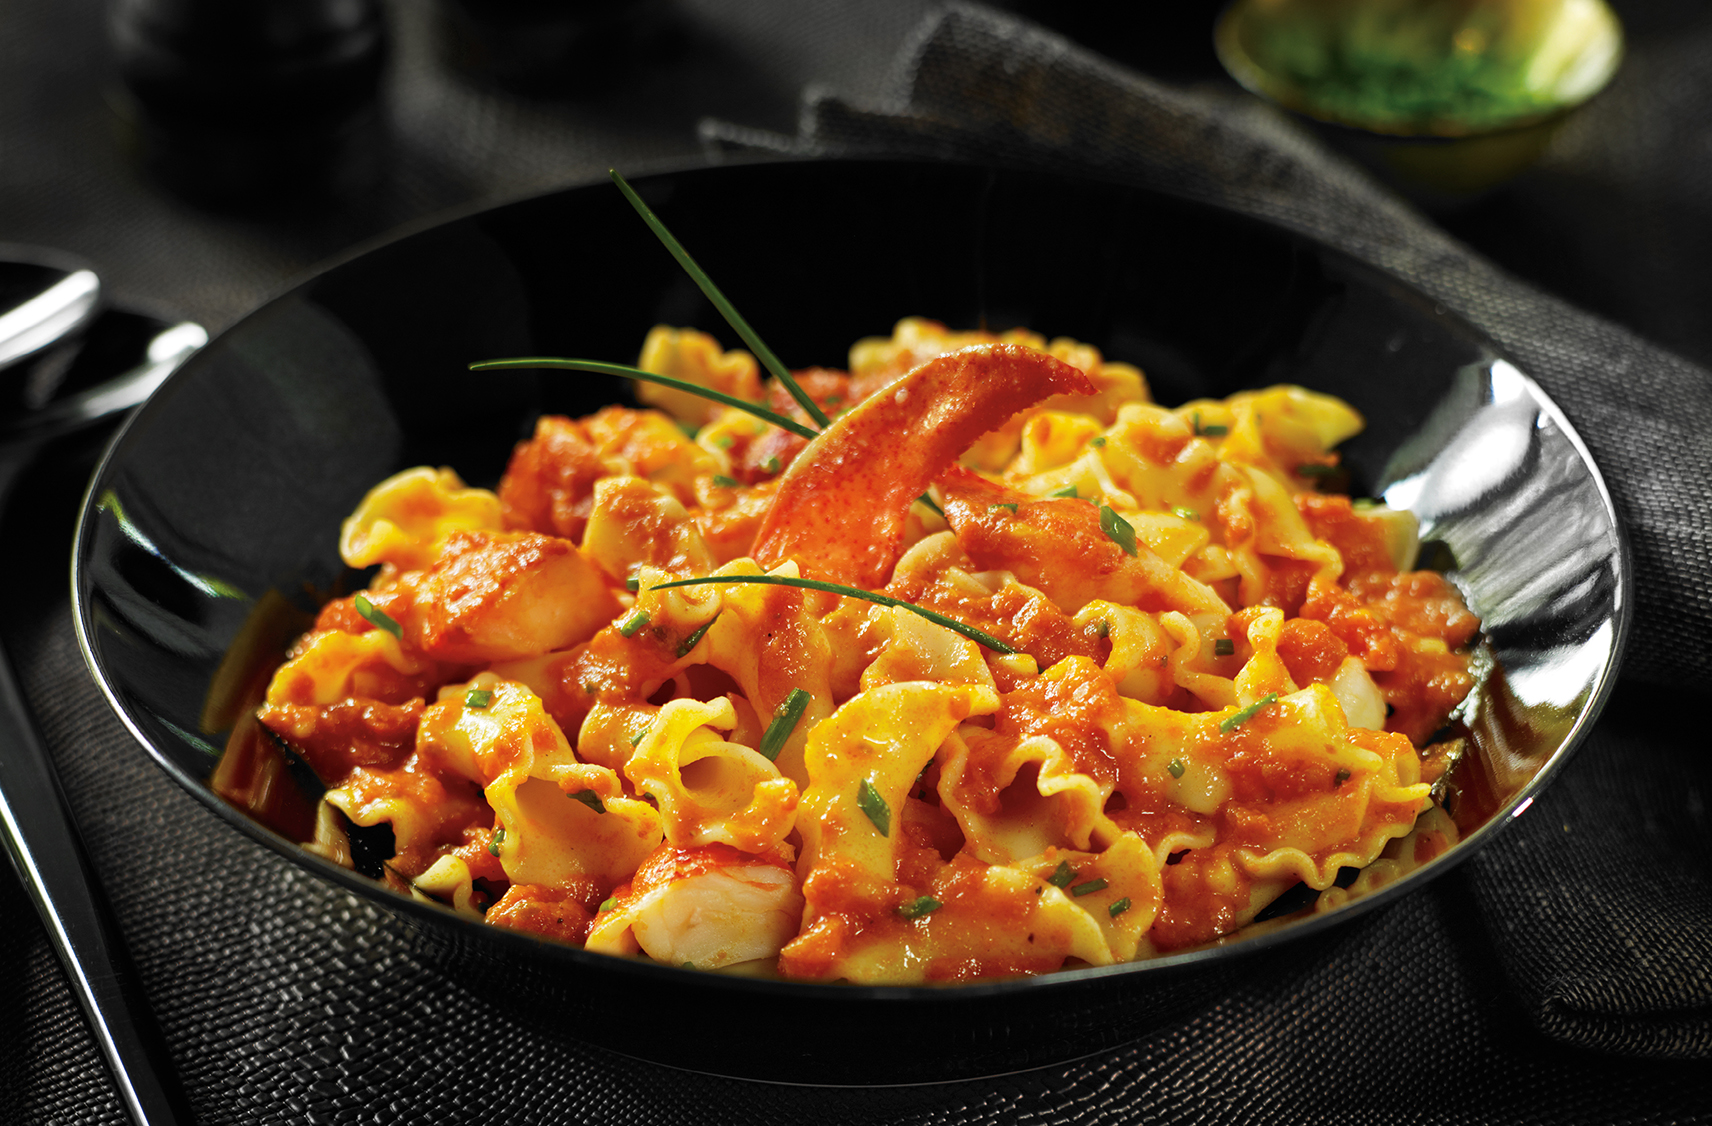 A bowl of fiorelli pasta with lobster pieces in a tomato-based vodka sauce